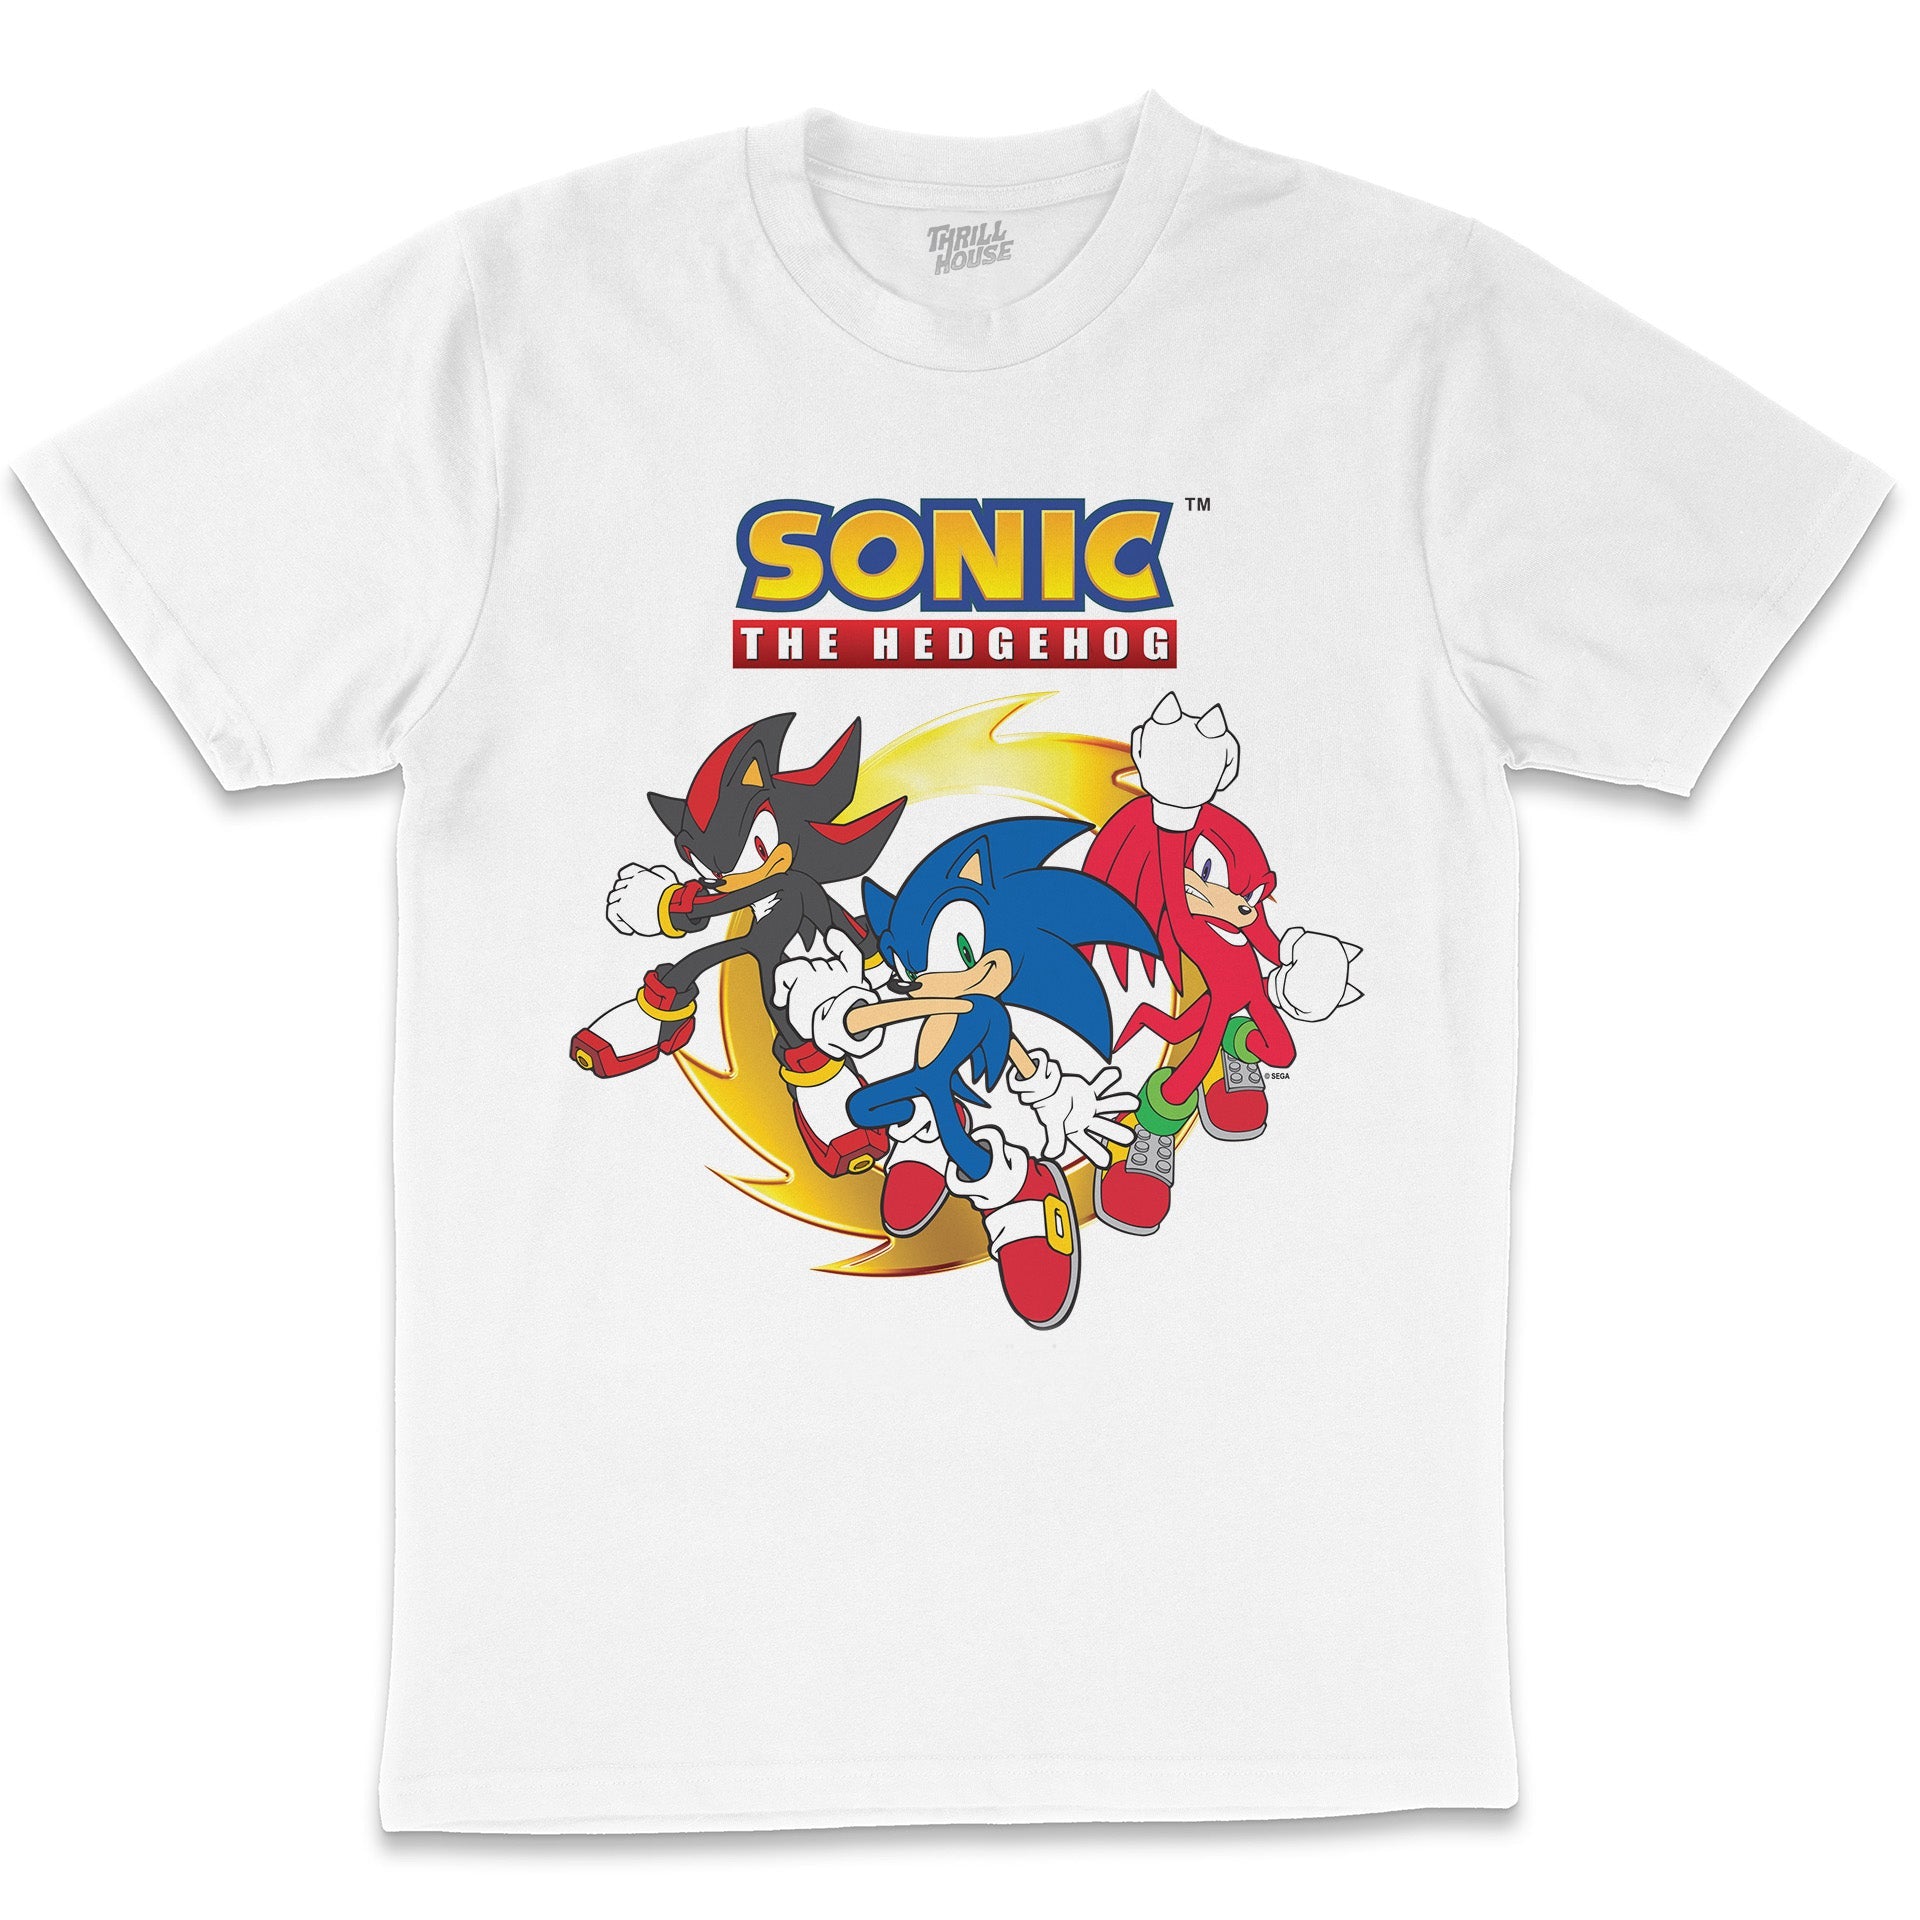 Sonic The Hedgehog Has a Posse Retro 90s Video Game Cartridge Console Officially Licensed SEGA T-Shirt